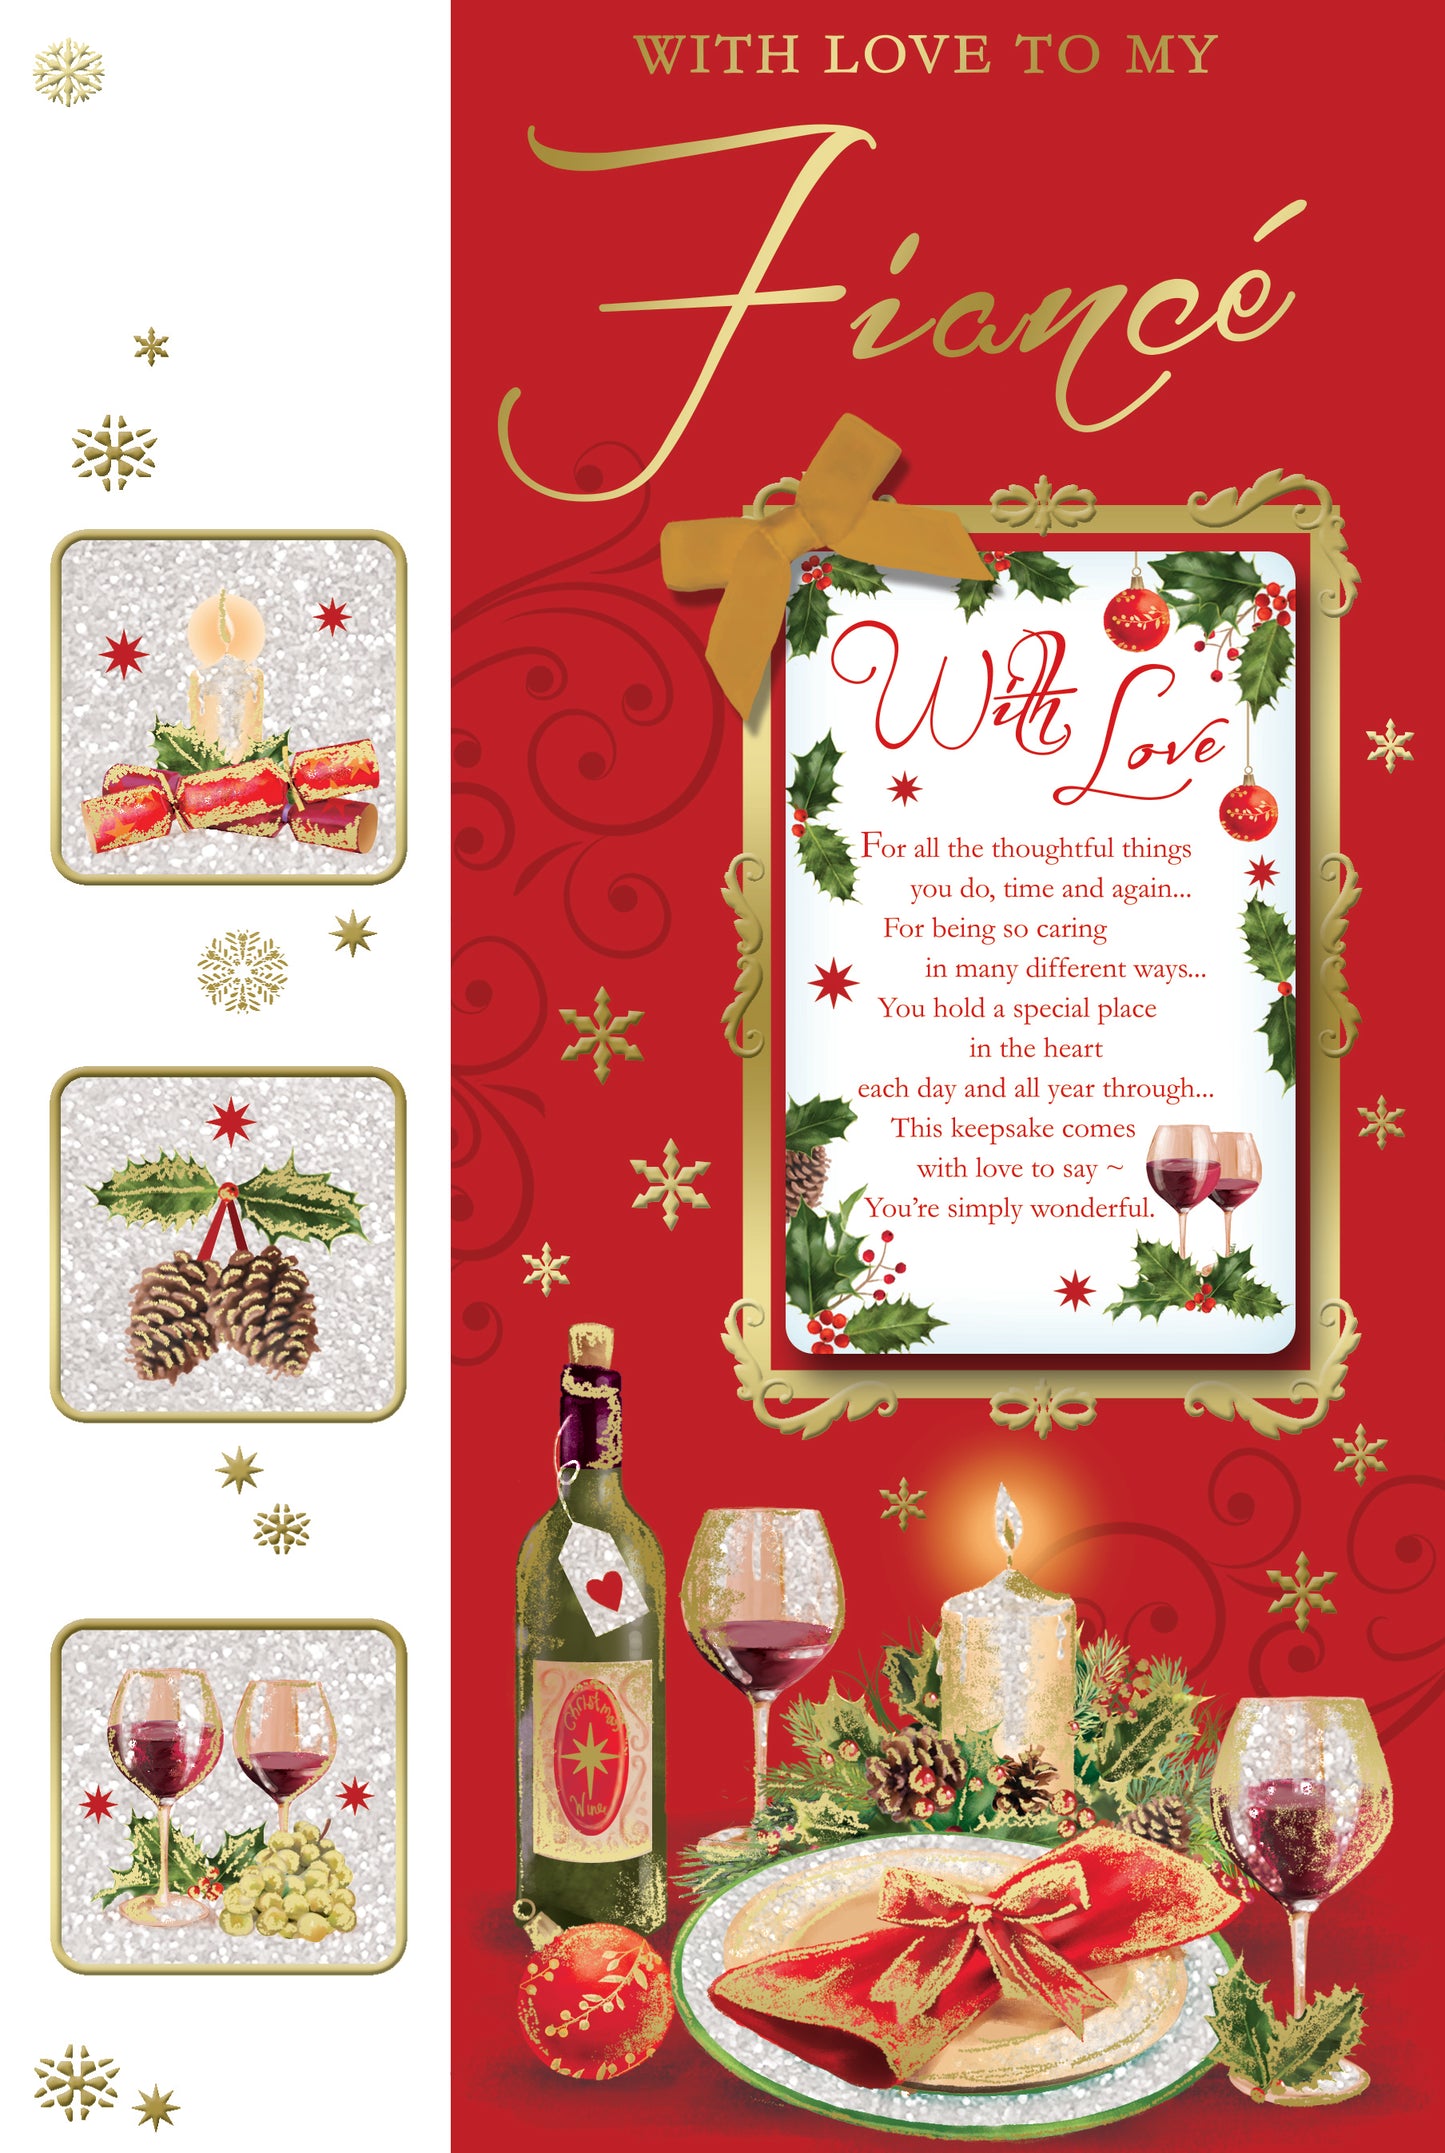 With Love to My Fiance Champagne Bottle Design Christmas Card